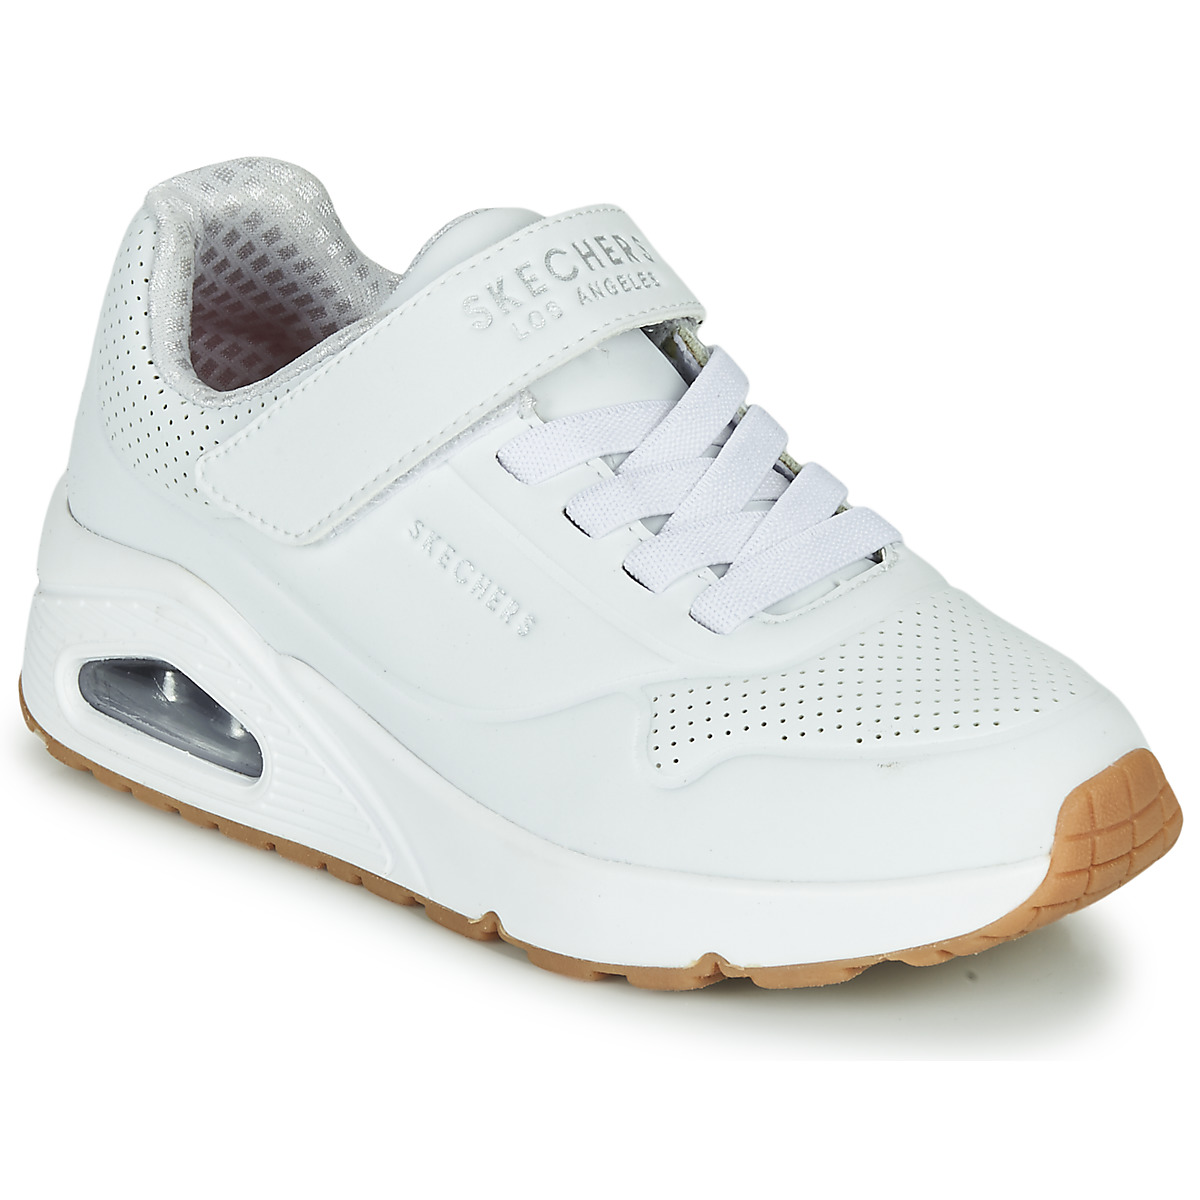 Kids Skechers Uno Stand On Air Sports Shoes White